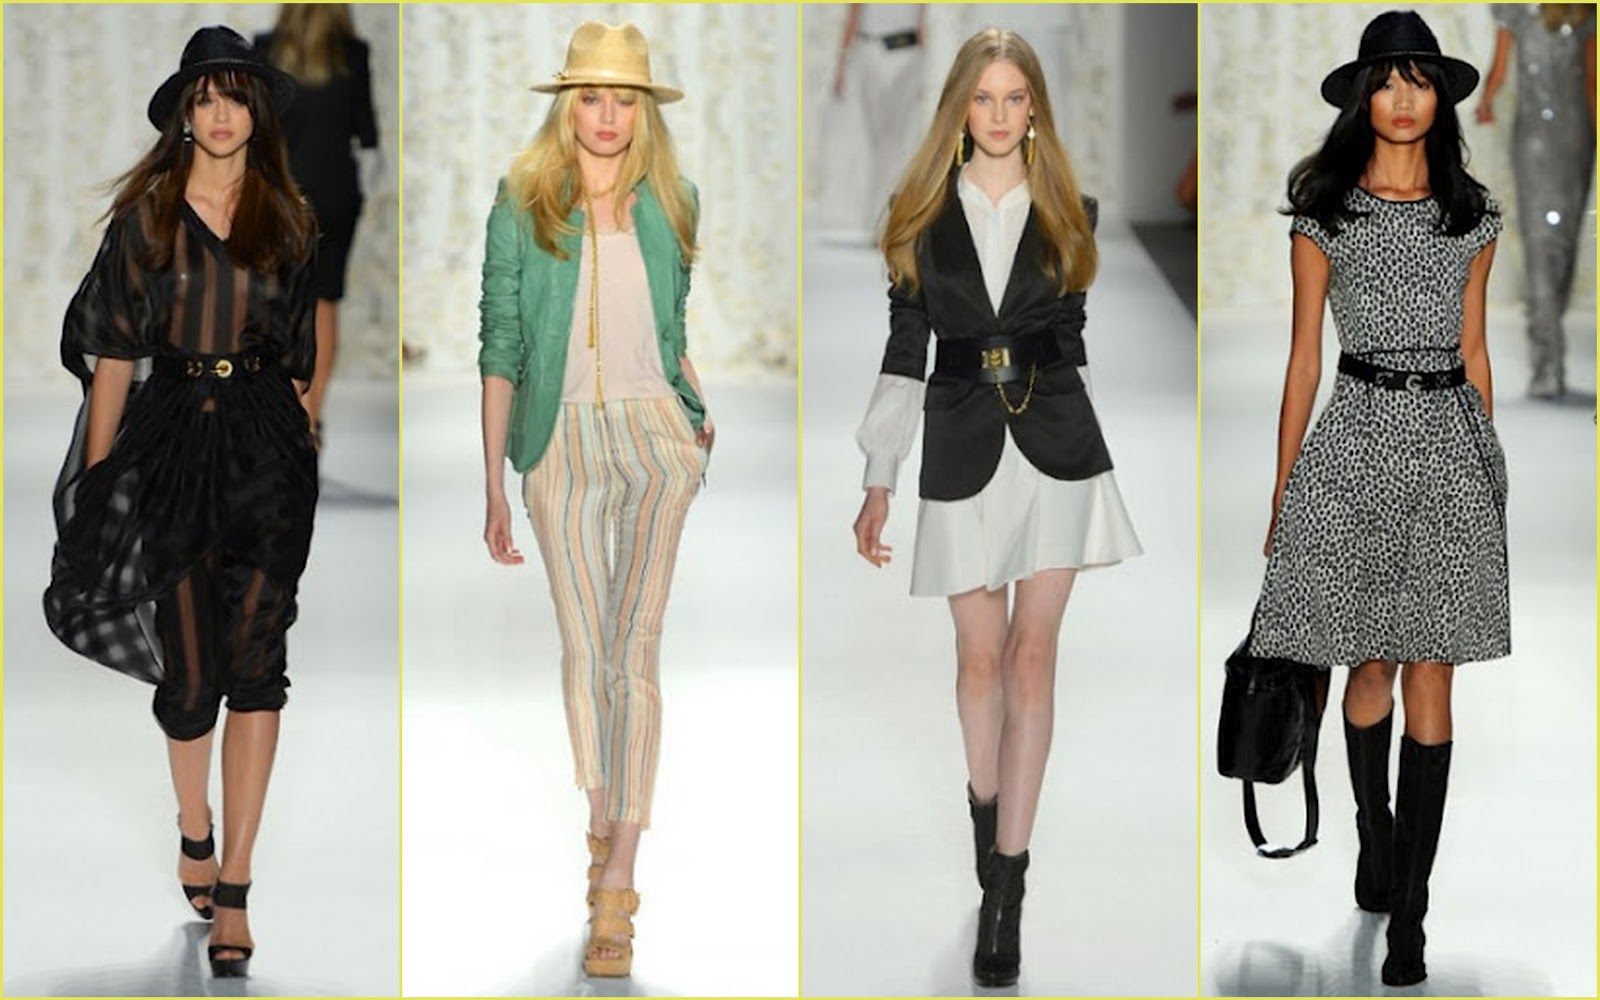 Paper Doll Romance: Fashion Week: Spring 2013 Collections Part 2